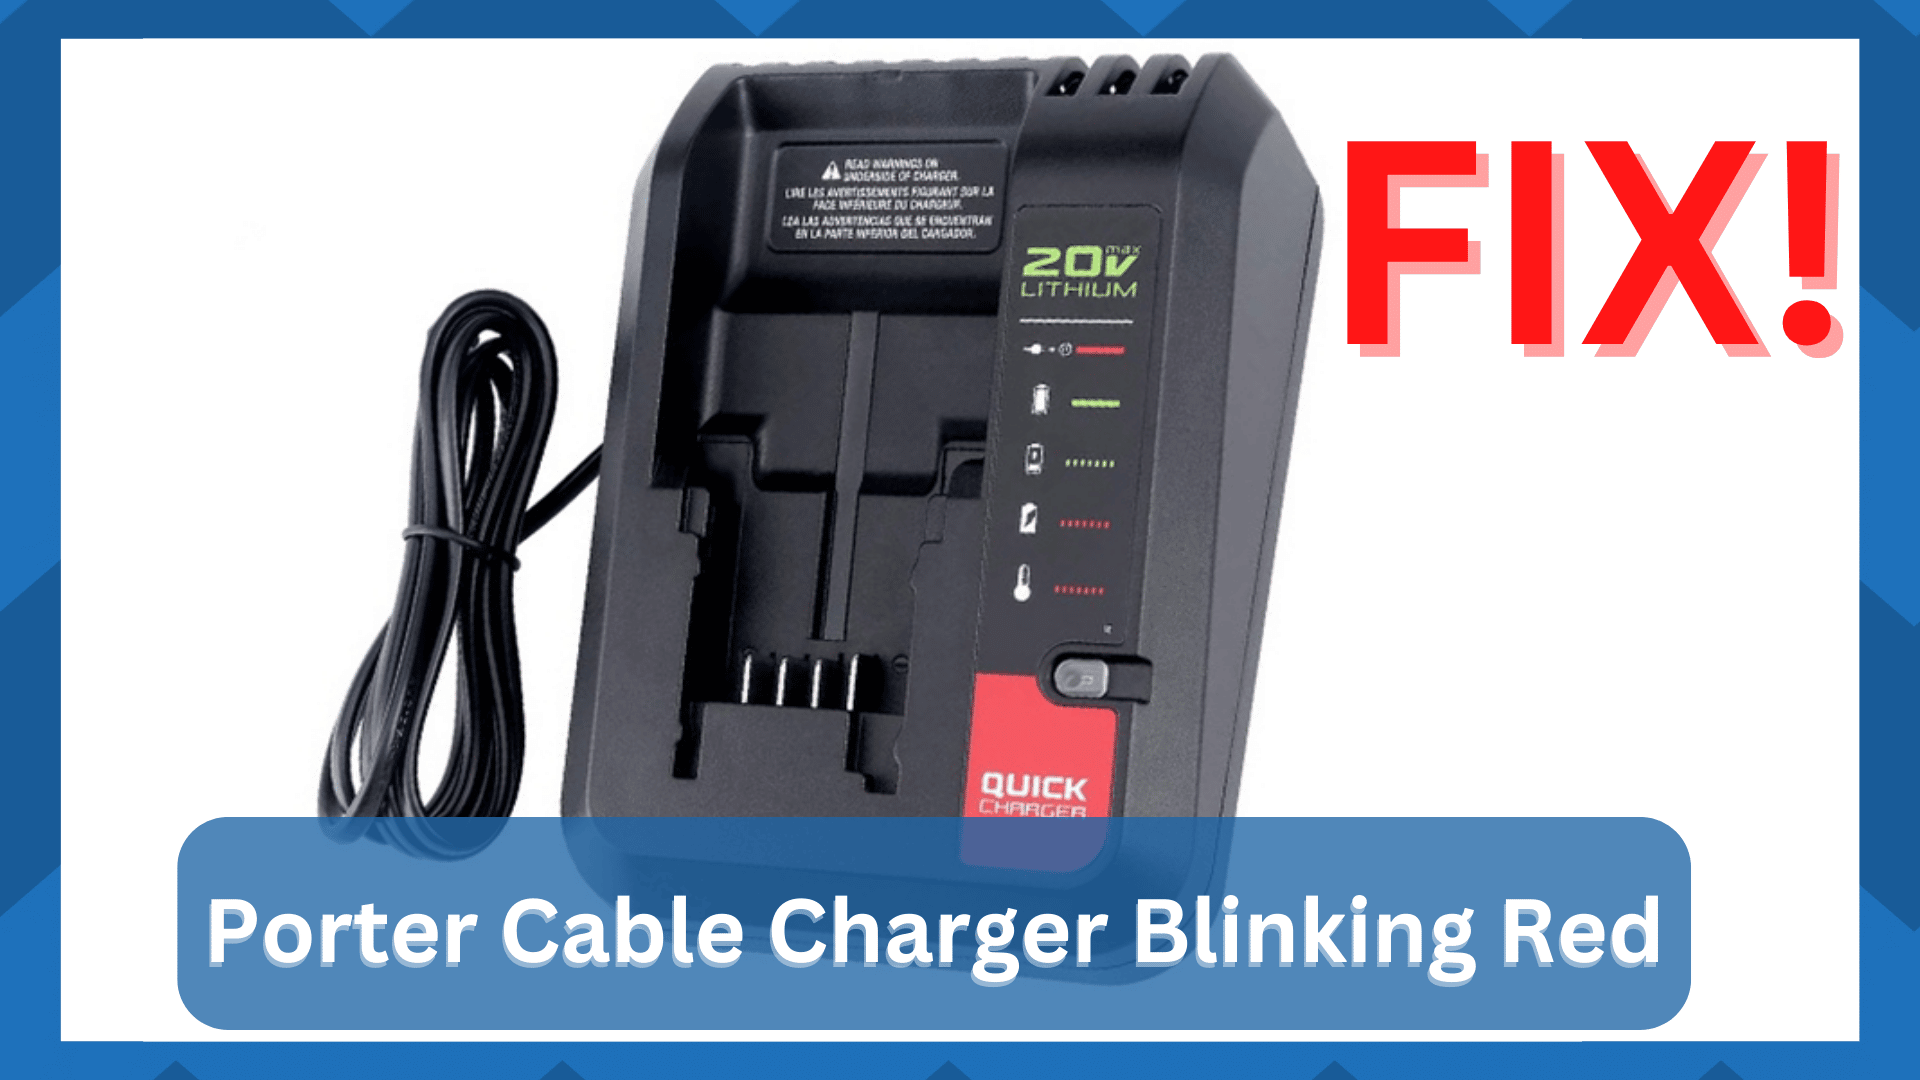 Porter cable charger blinking red